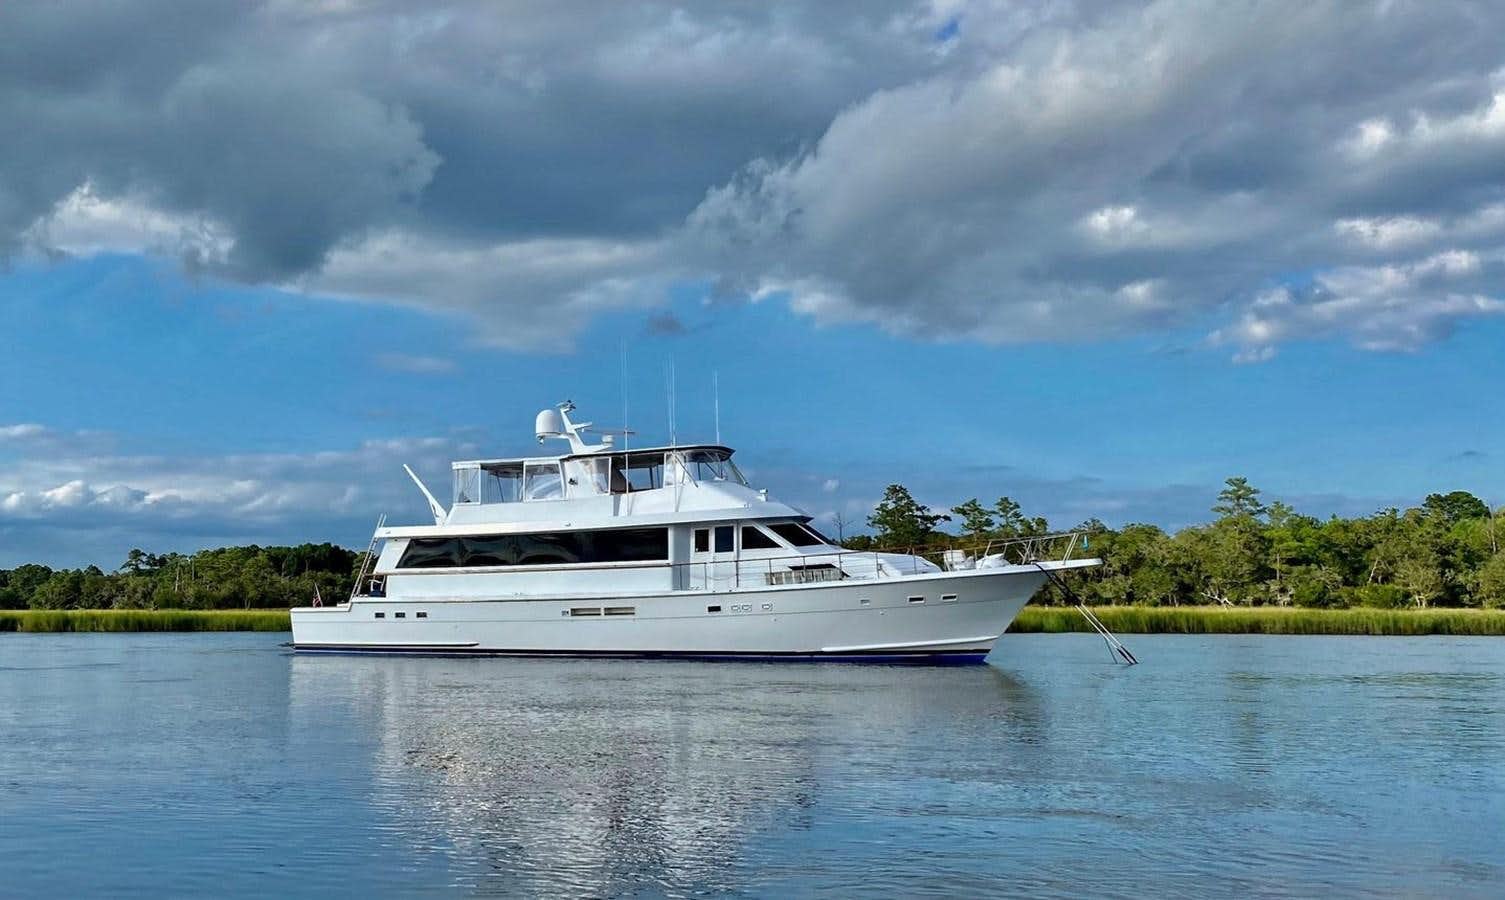 Norther venture
Yacht for Sale